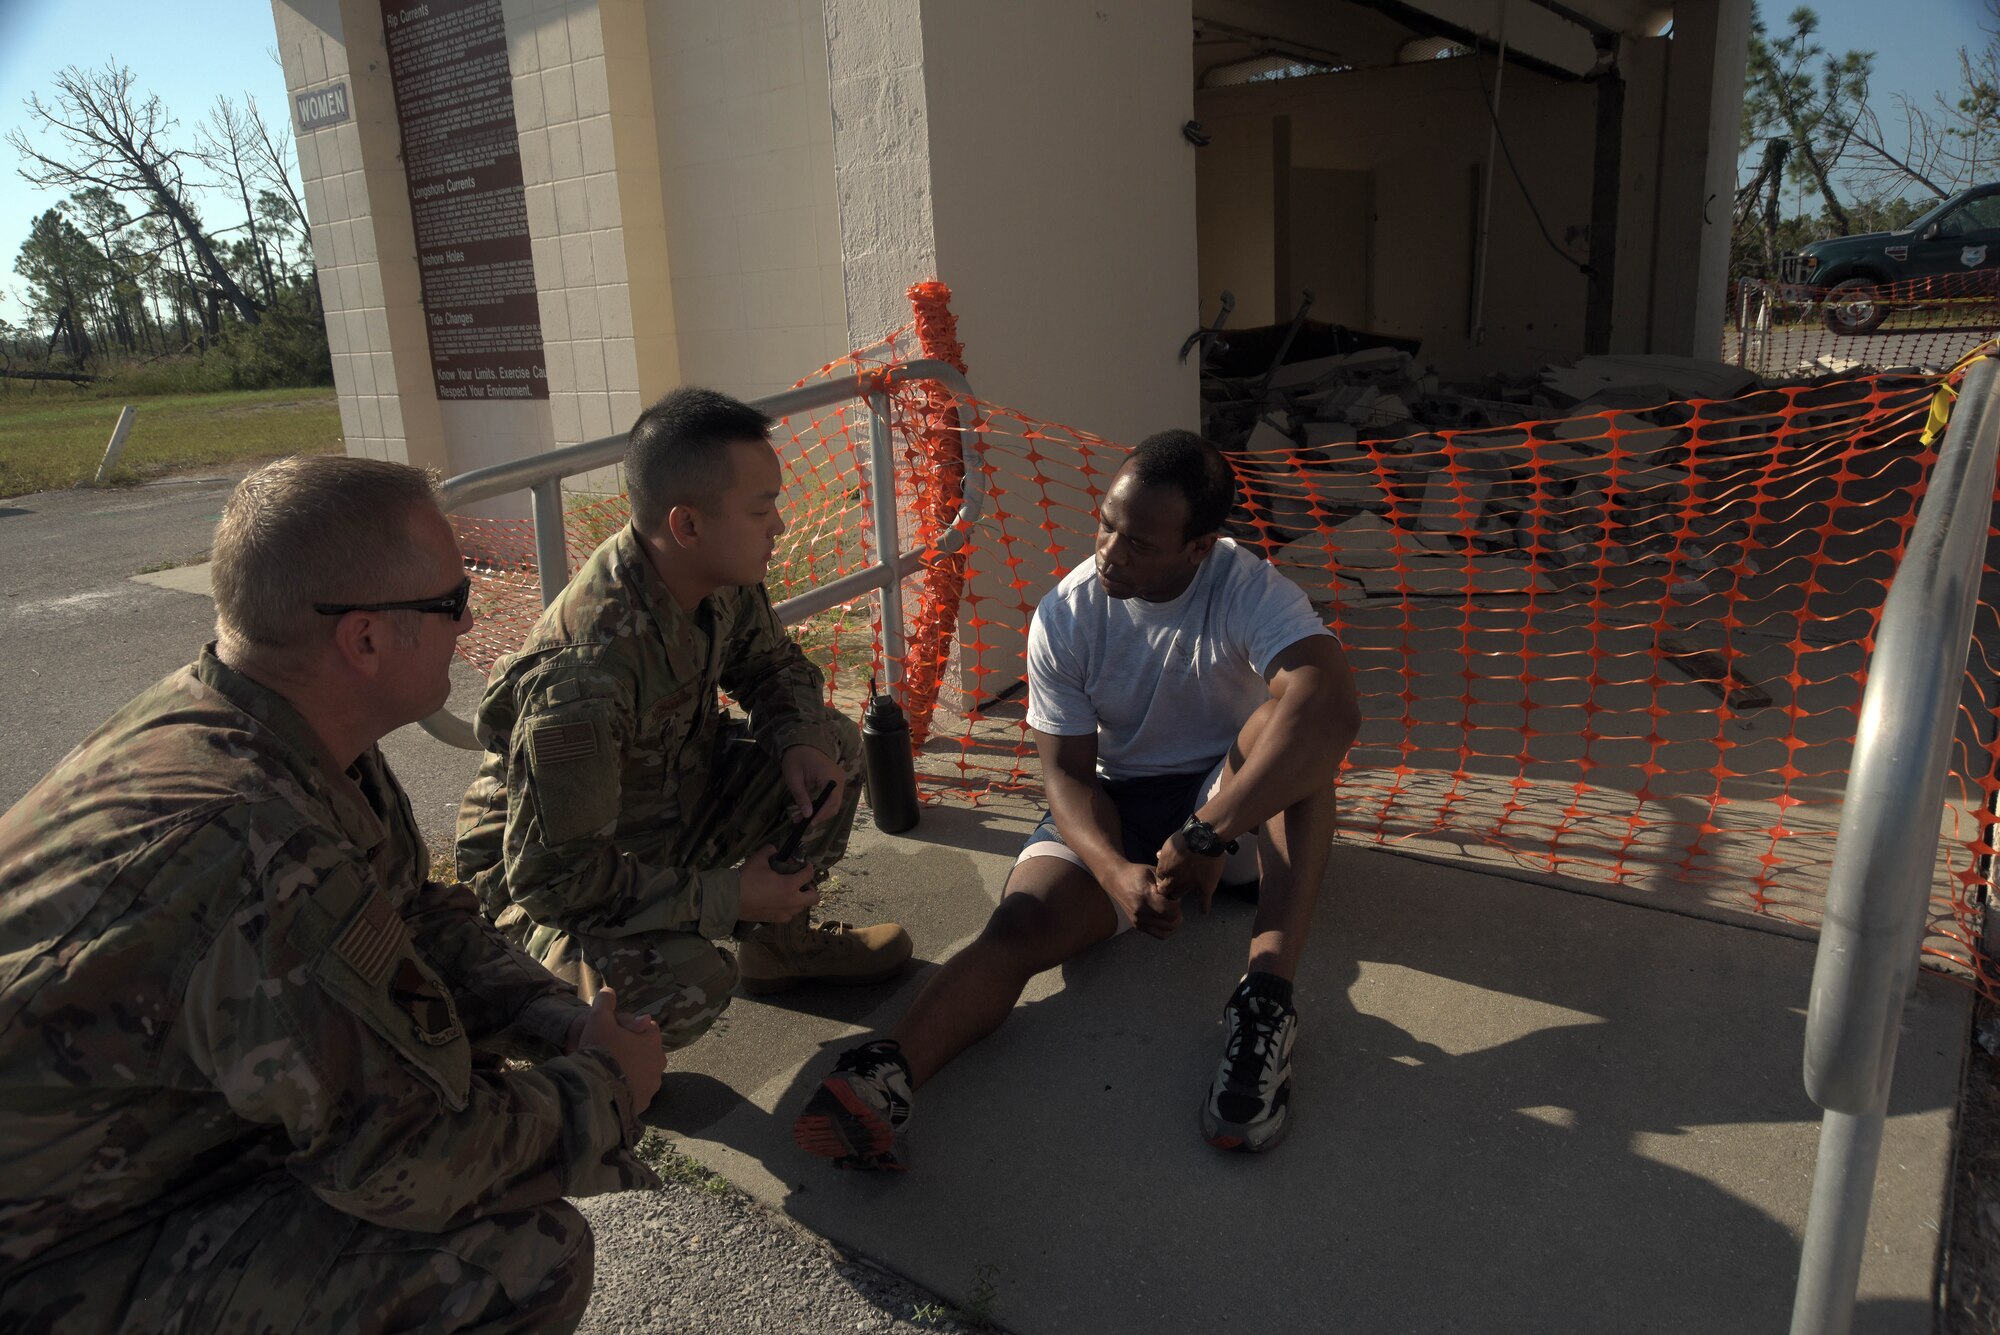 Col. Brian Laidlaw, 325th Fighter Wing commander, left, Airman 1st Class Brian Nguyen, center, and Senior Airman Zachary Collins, 325th Operational Medical Readiness Squadron Ambulance Services Department medics, participate in an emergency medical response exercise Oct. 4, 2019, at Tyndall Air Force Base, Florida. The 325th OMRS had initiated a simulation to practice response, transportation, and providing basic emergency medical service when patient care is needed for heat exhaustion to give the wing commander a first-hand experience of on the job procedures. (U.S. Air Force photo by Staff Sgt. Magen M. Reeves)